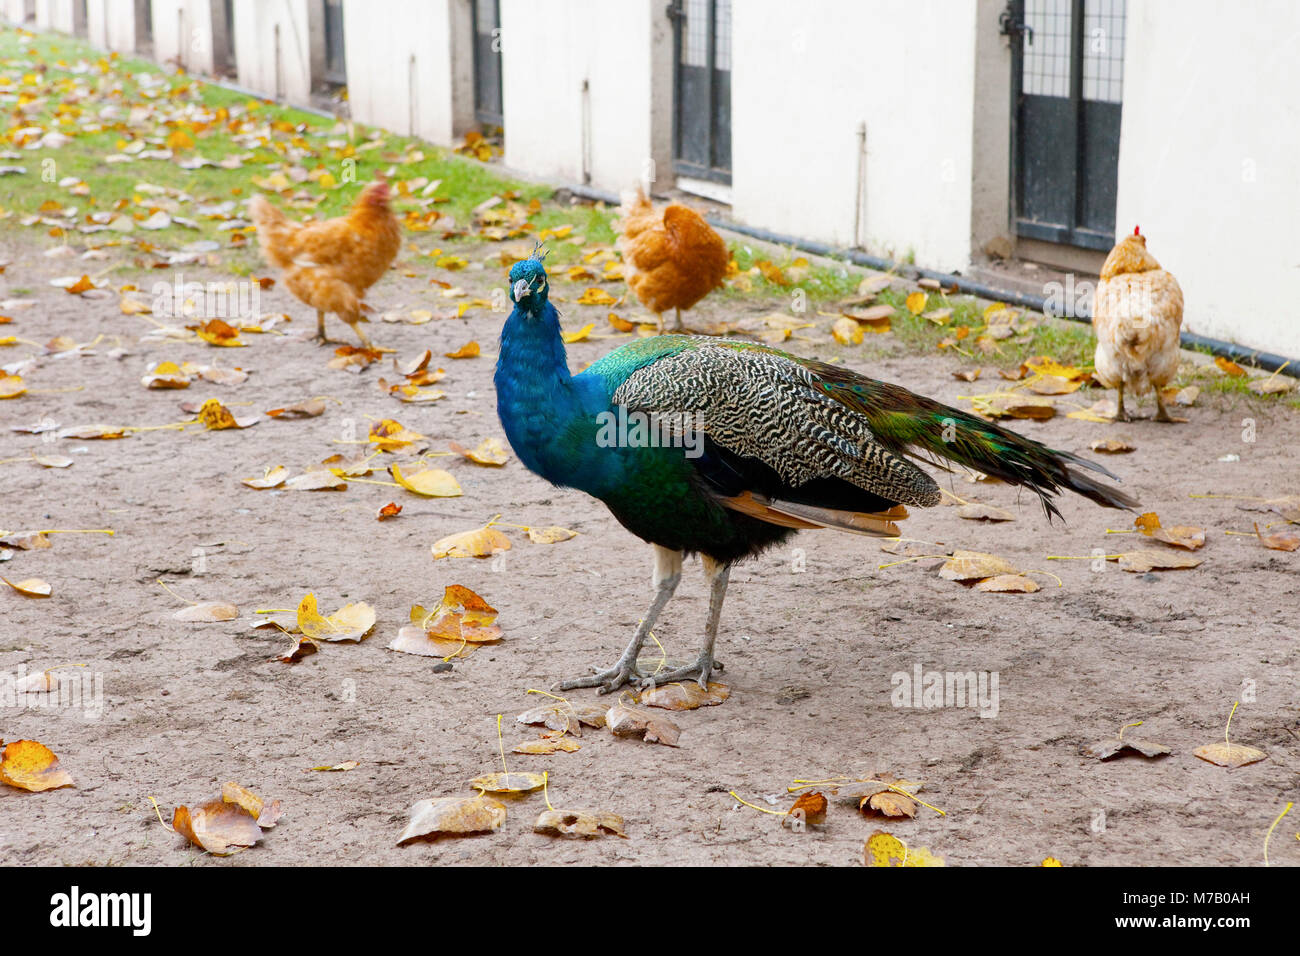 Peacock with roosters in a farm Stock Photo